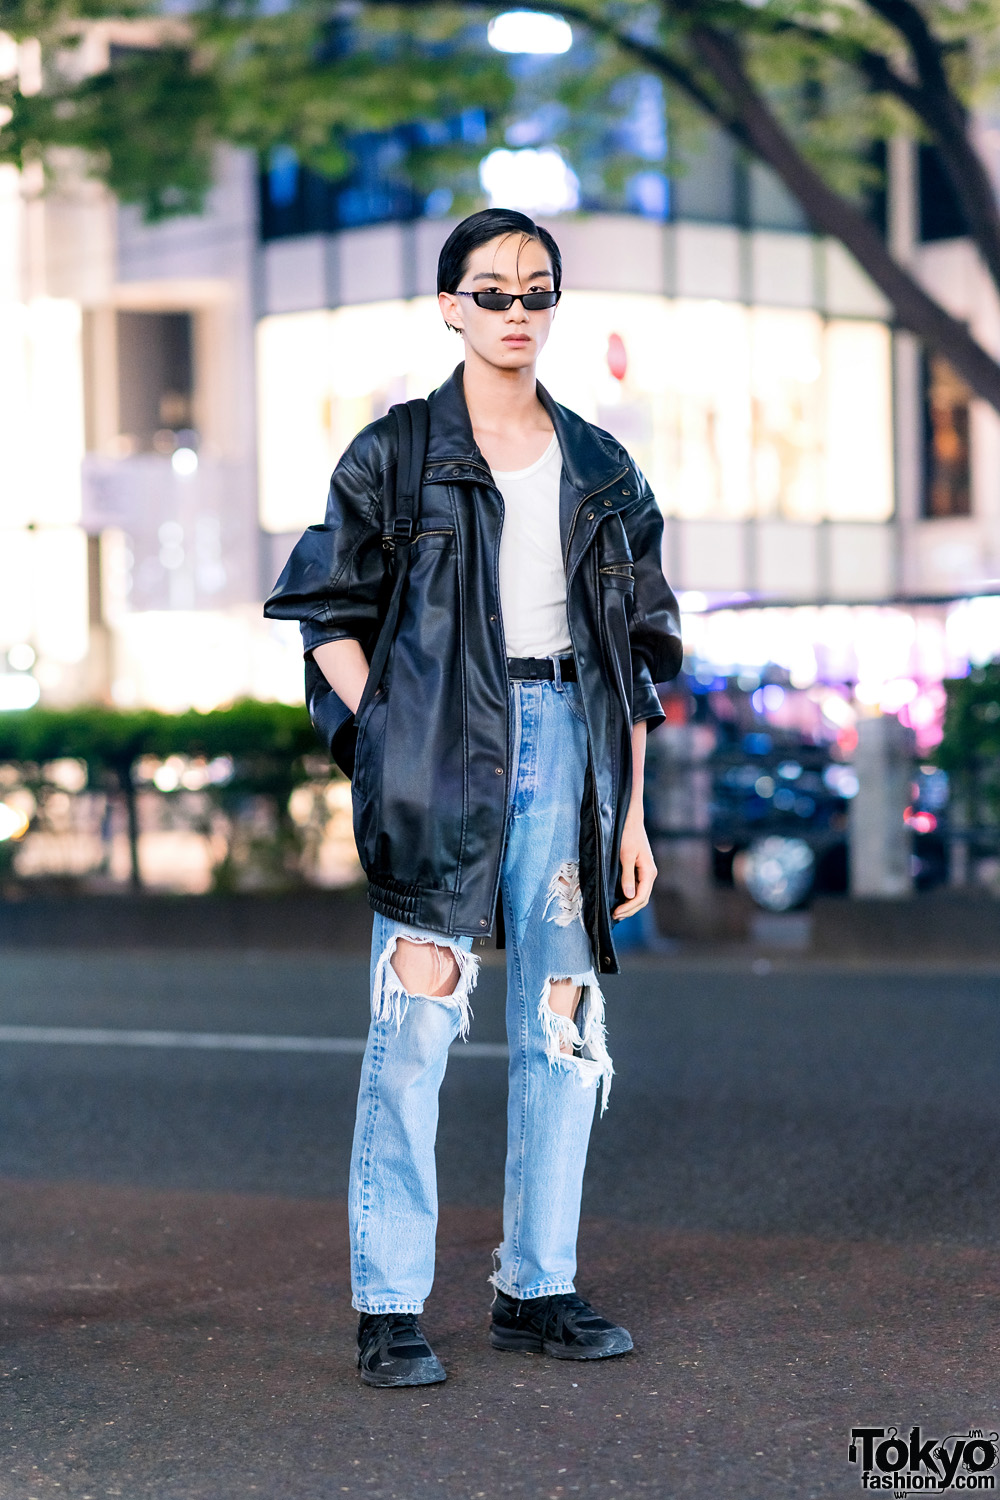 Harajuku Model's Casual Streetwear w/ Acne Studios Sunglasses, King Size  Leather Jacket, N.Hoolywood, Levi's Ripped Jeans, Diesel Backpack  Asics  Sneakers – Tokyo Fashion